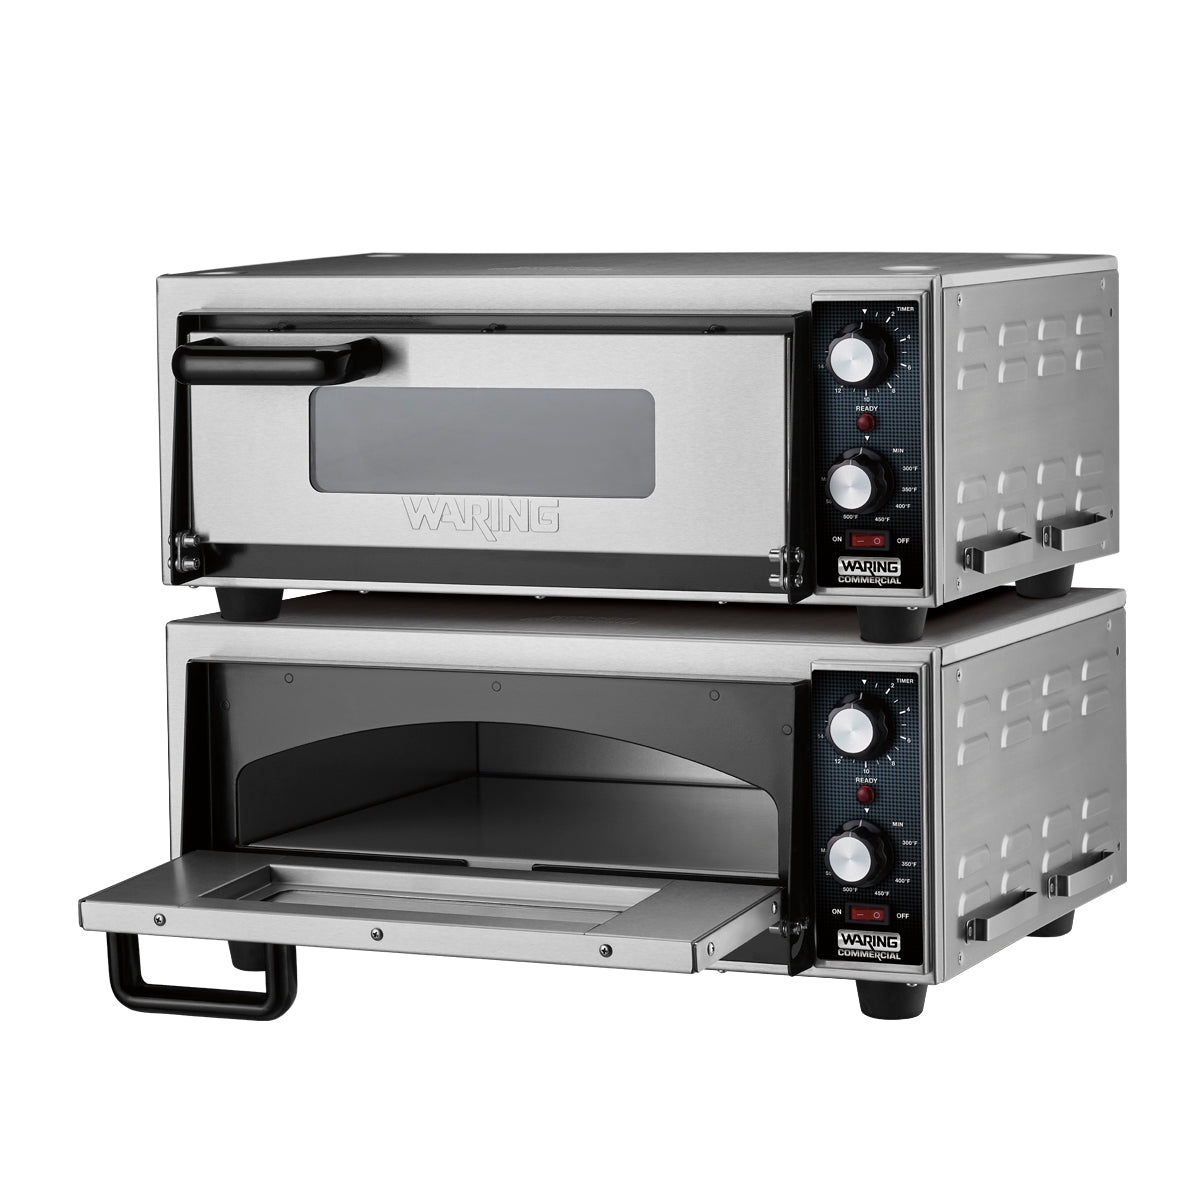 WPO100 Single-Deck Commercial Pizza Oven by Waring Commercial